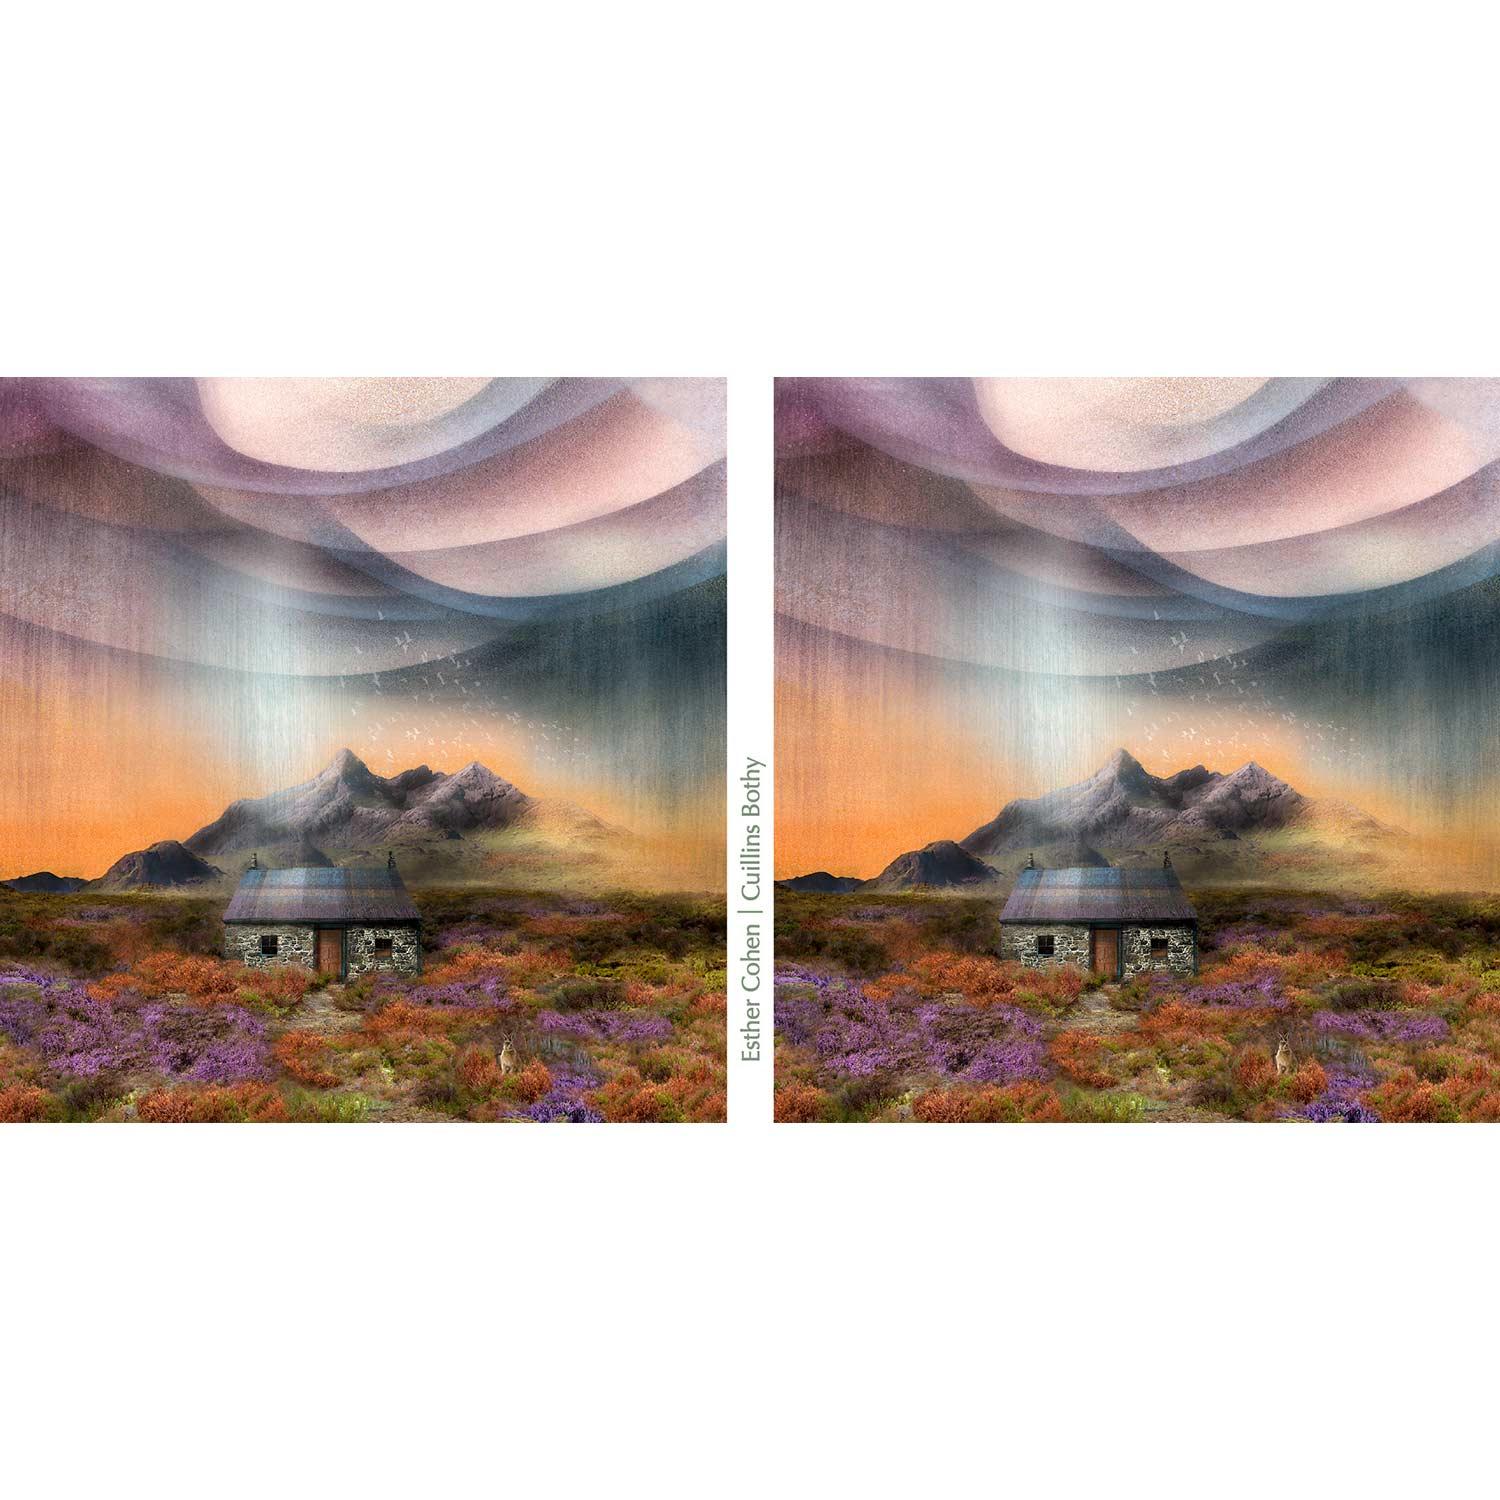 Cuillins Bothy  by artist Esther Cohen